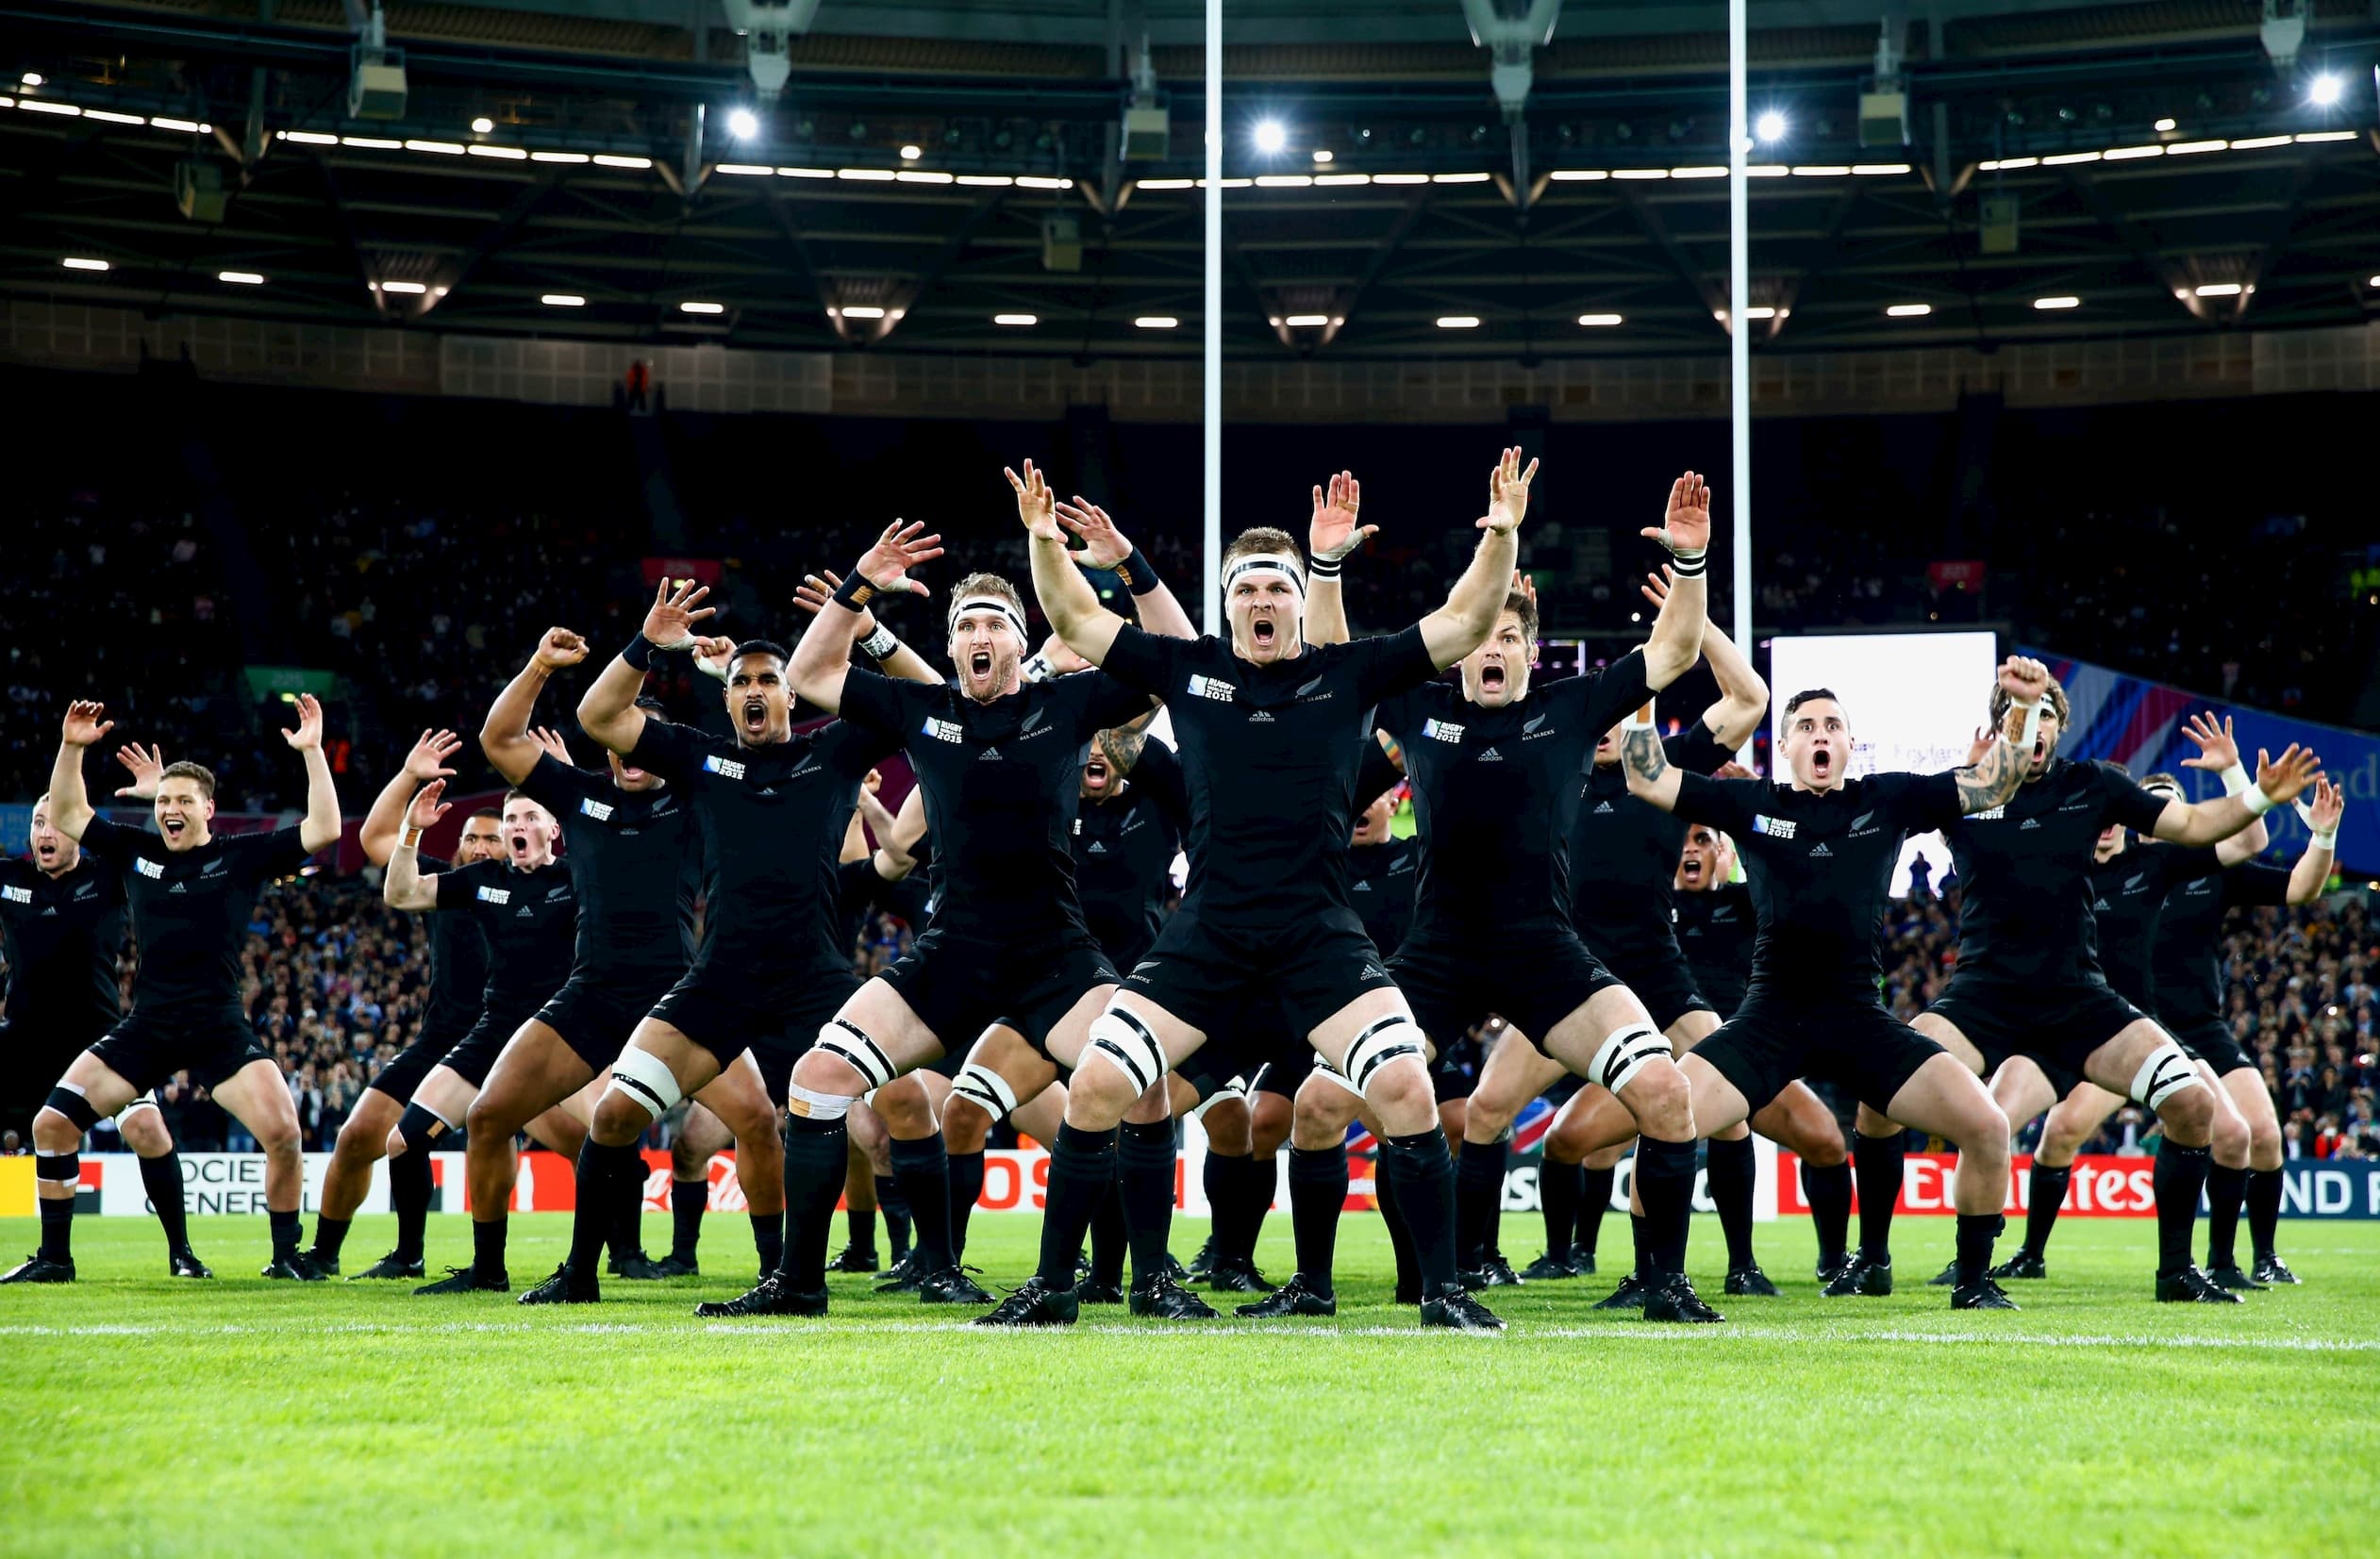 Haka: New Zealand All Blacks rugby team, Traditional dance to honor Māori culture, The match with USA. 2530x1660 HD Wallpaper.